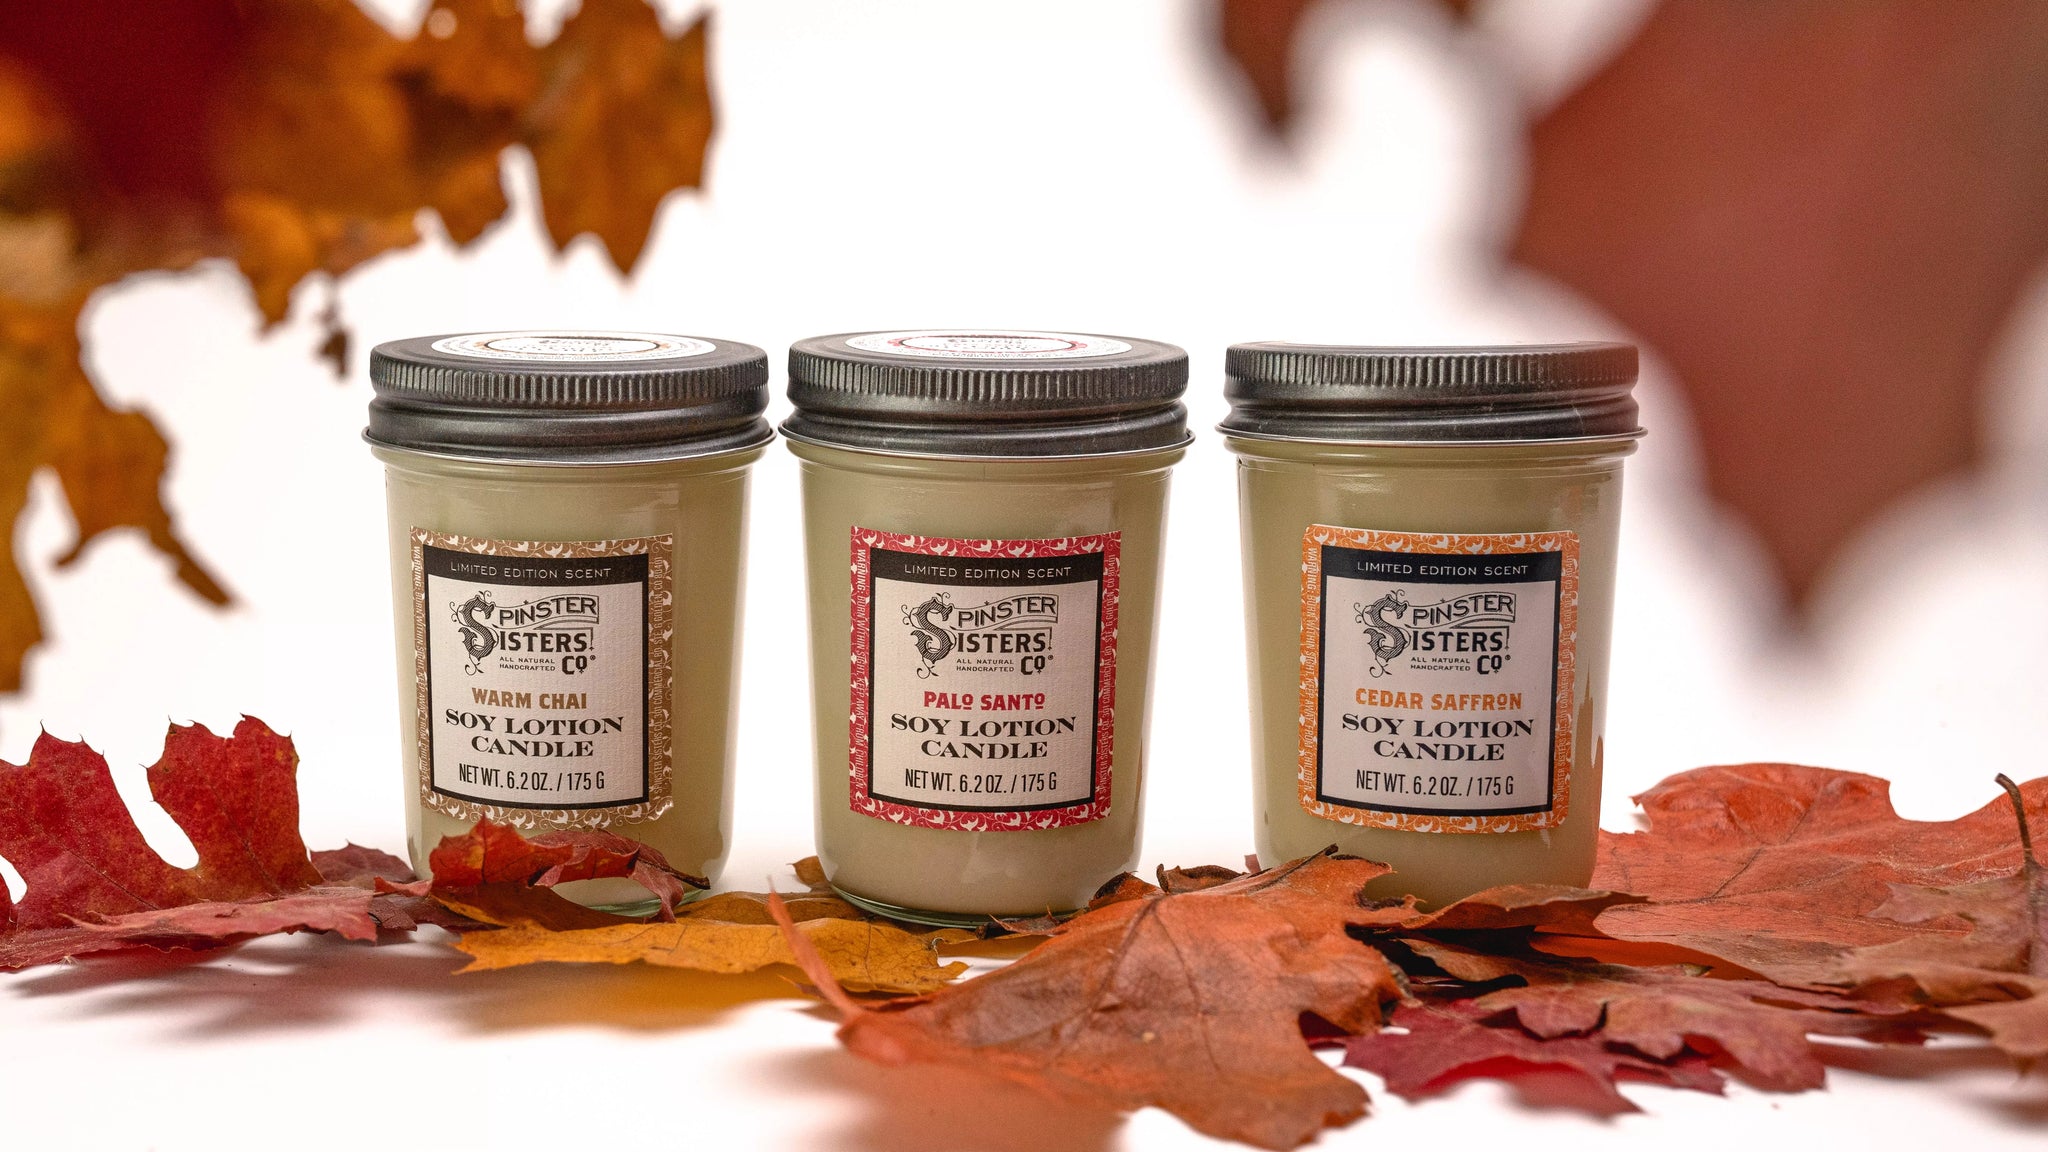 Light Up Some Fall Scents